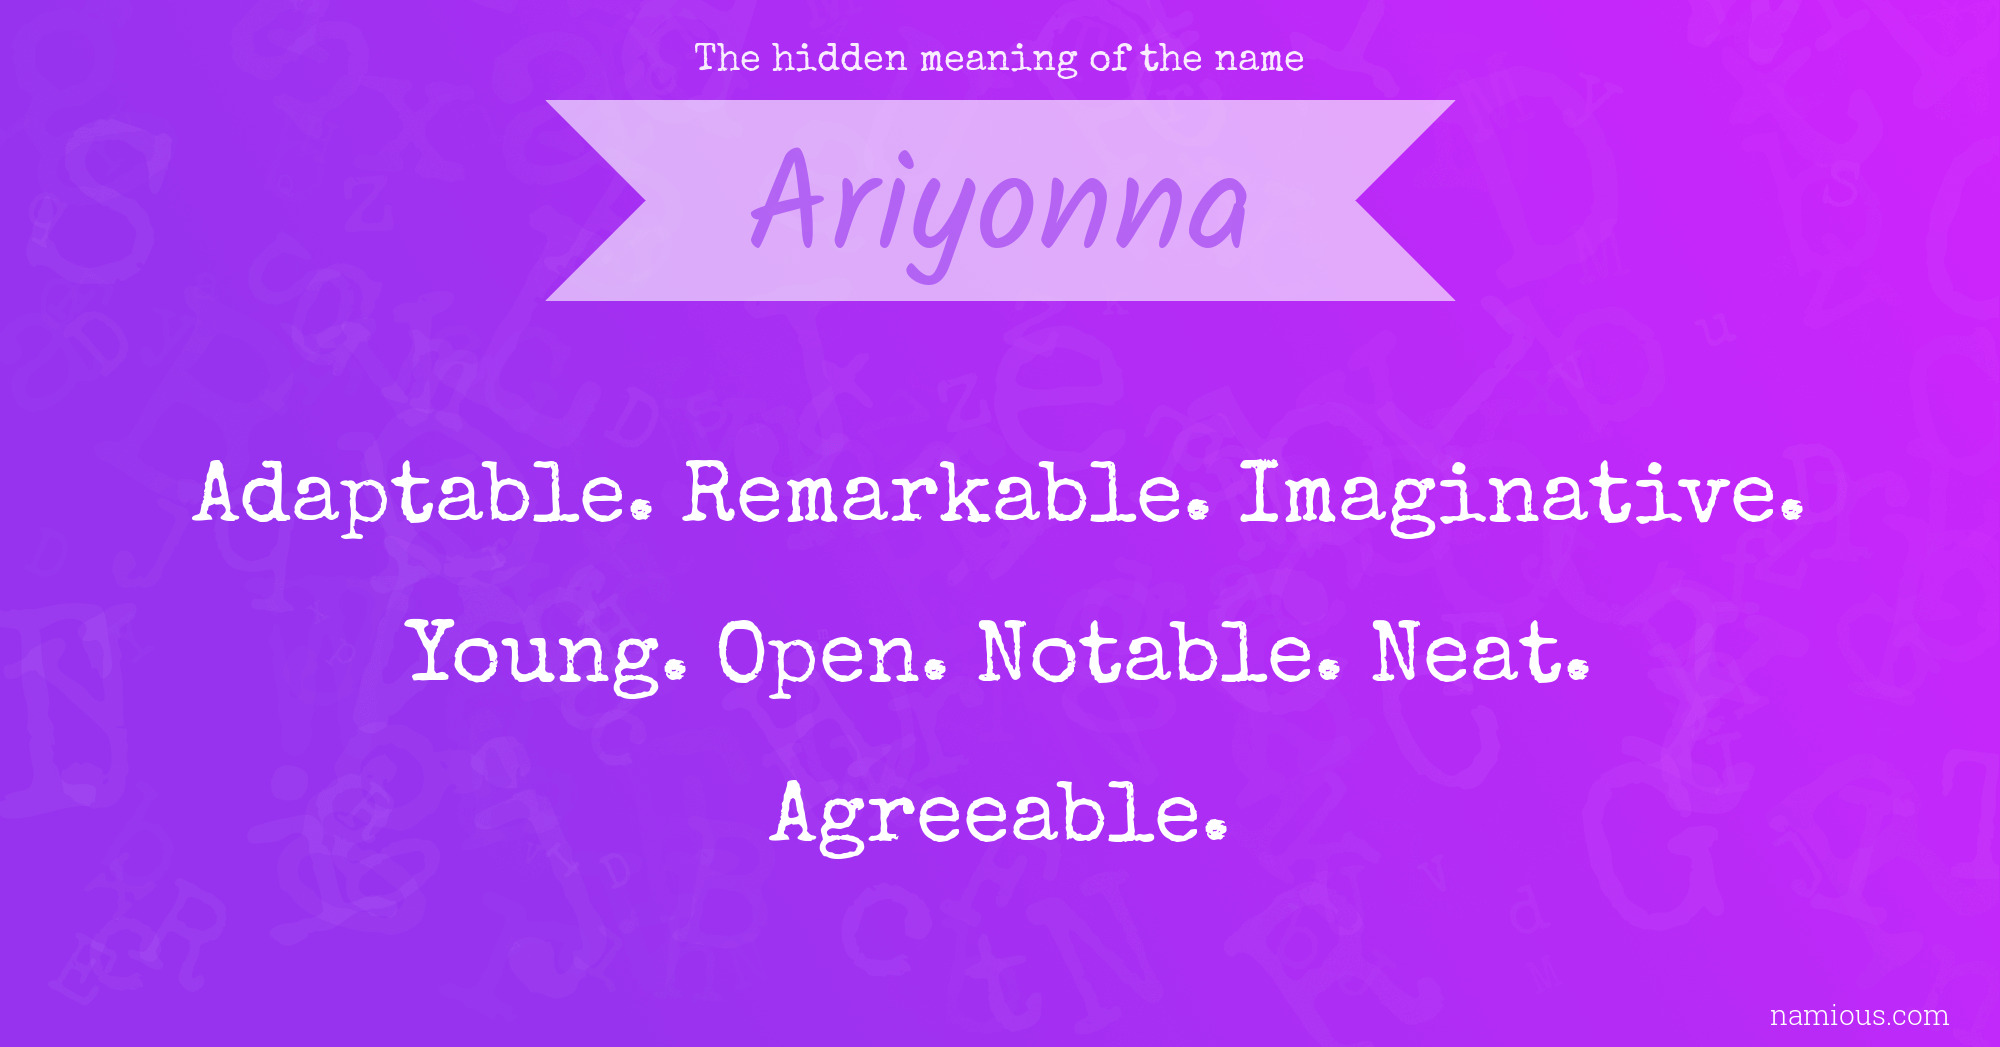 The hidden meaning of the name Ariyonna